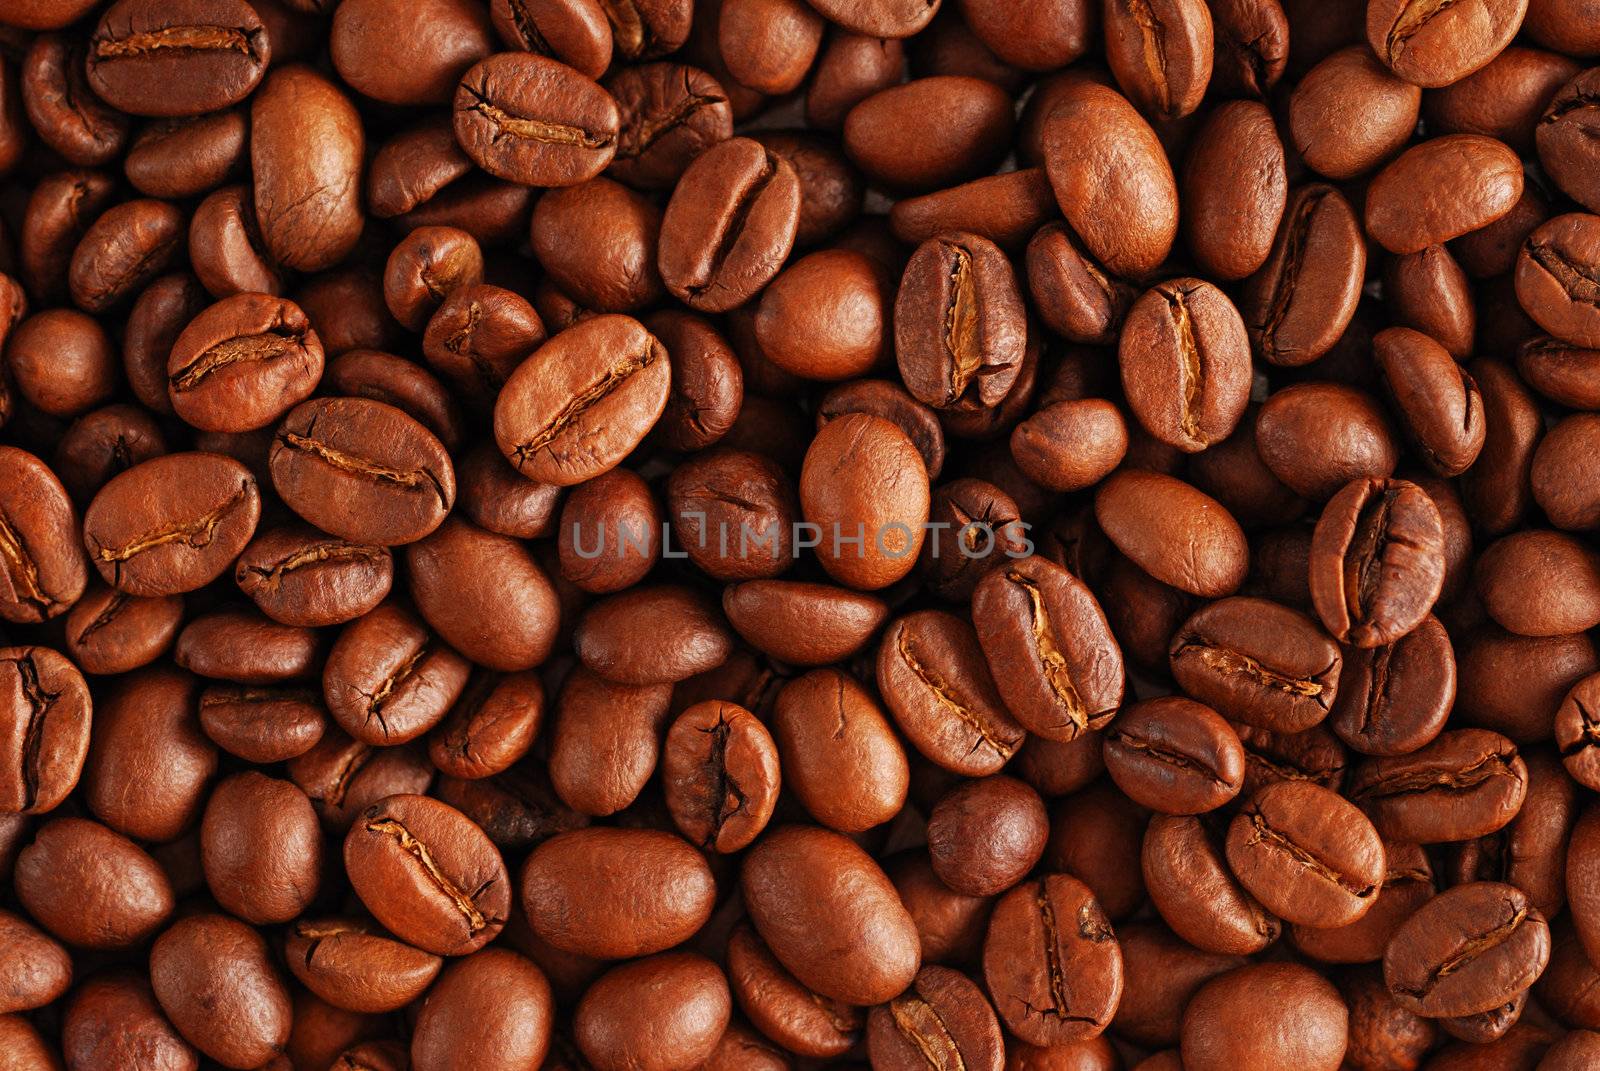 Coffee beans by haveseen